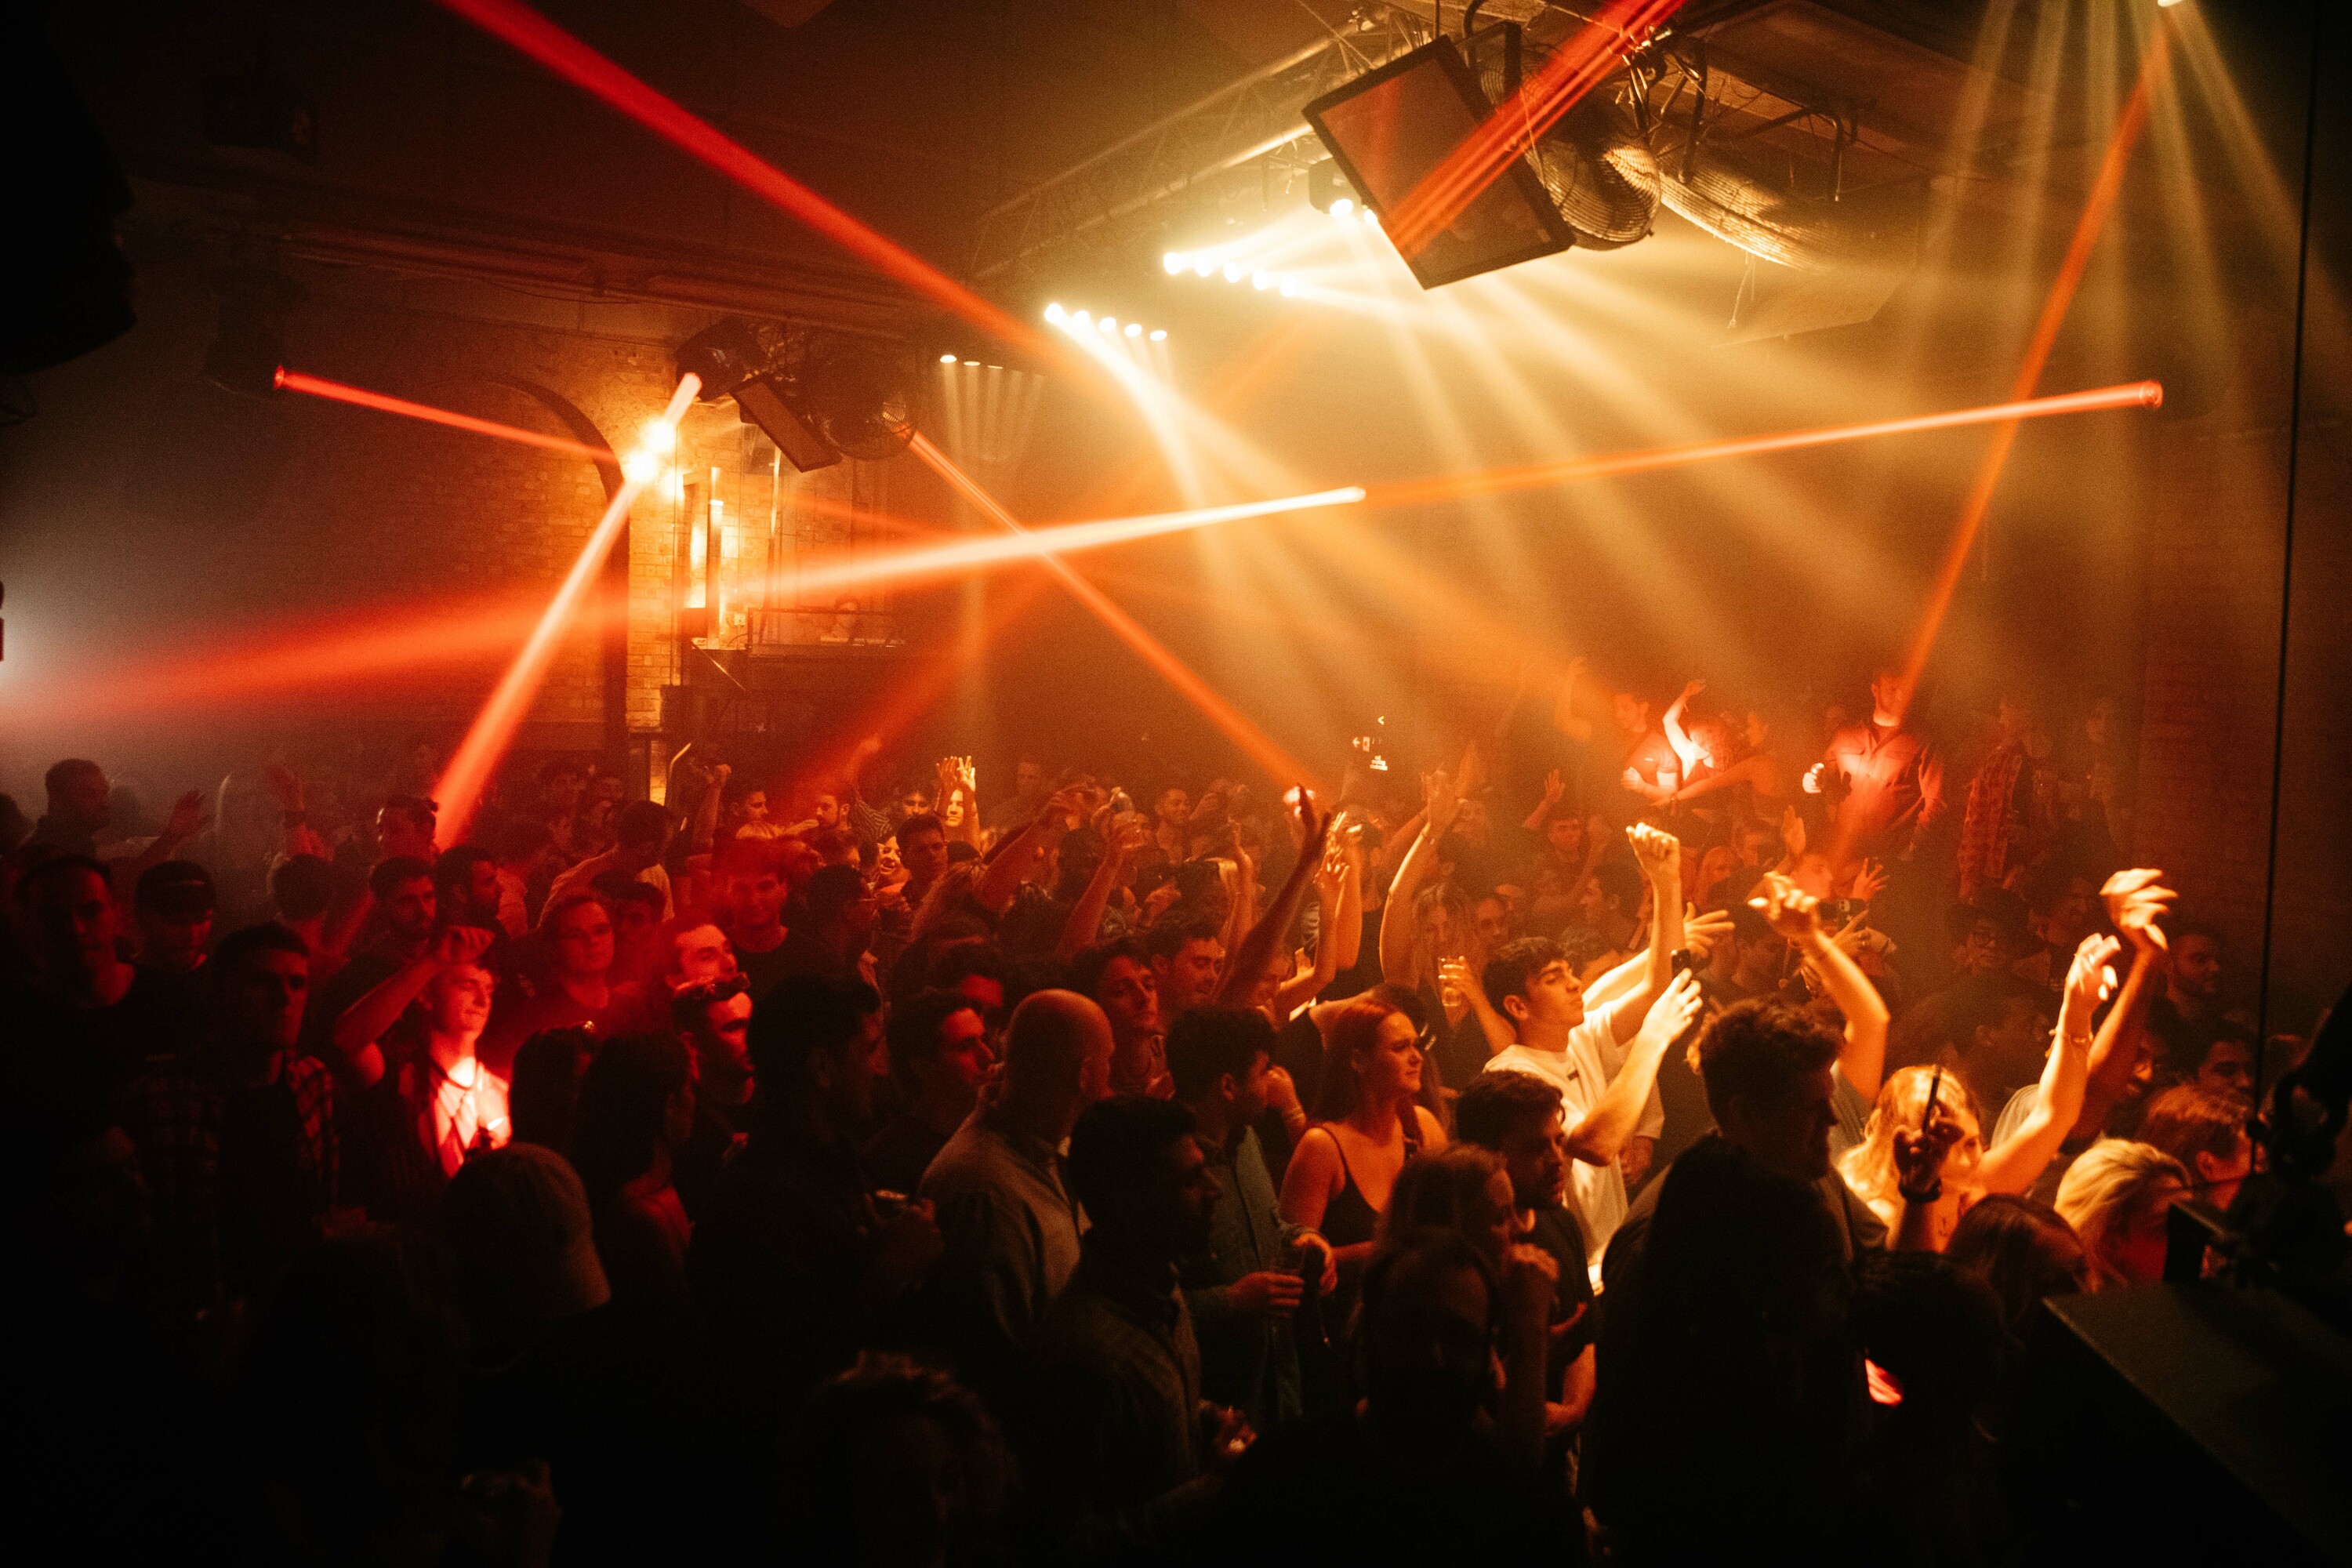 RANKED: The 10 best nights out in the UK - Party On